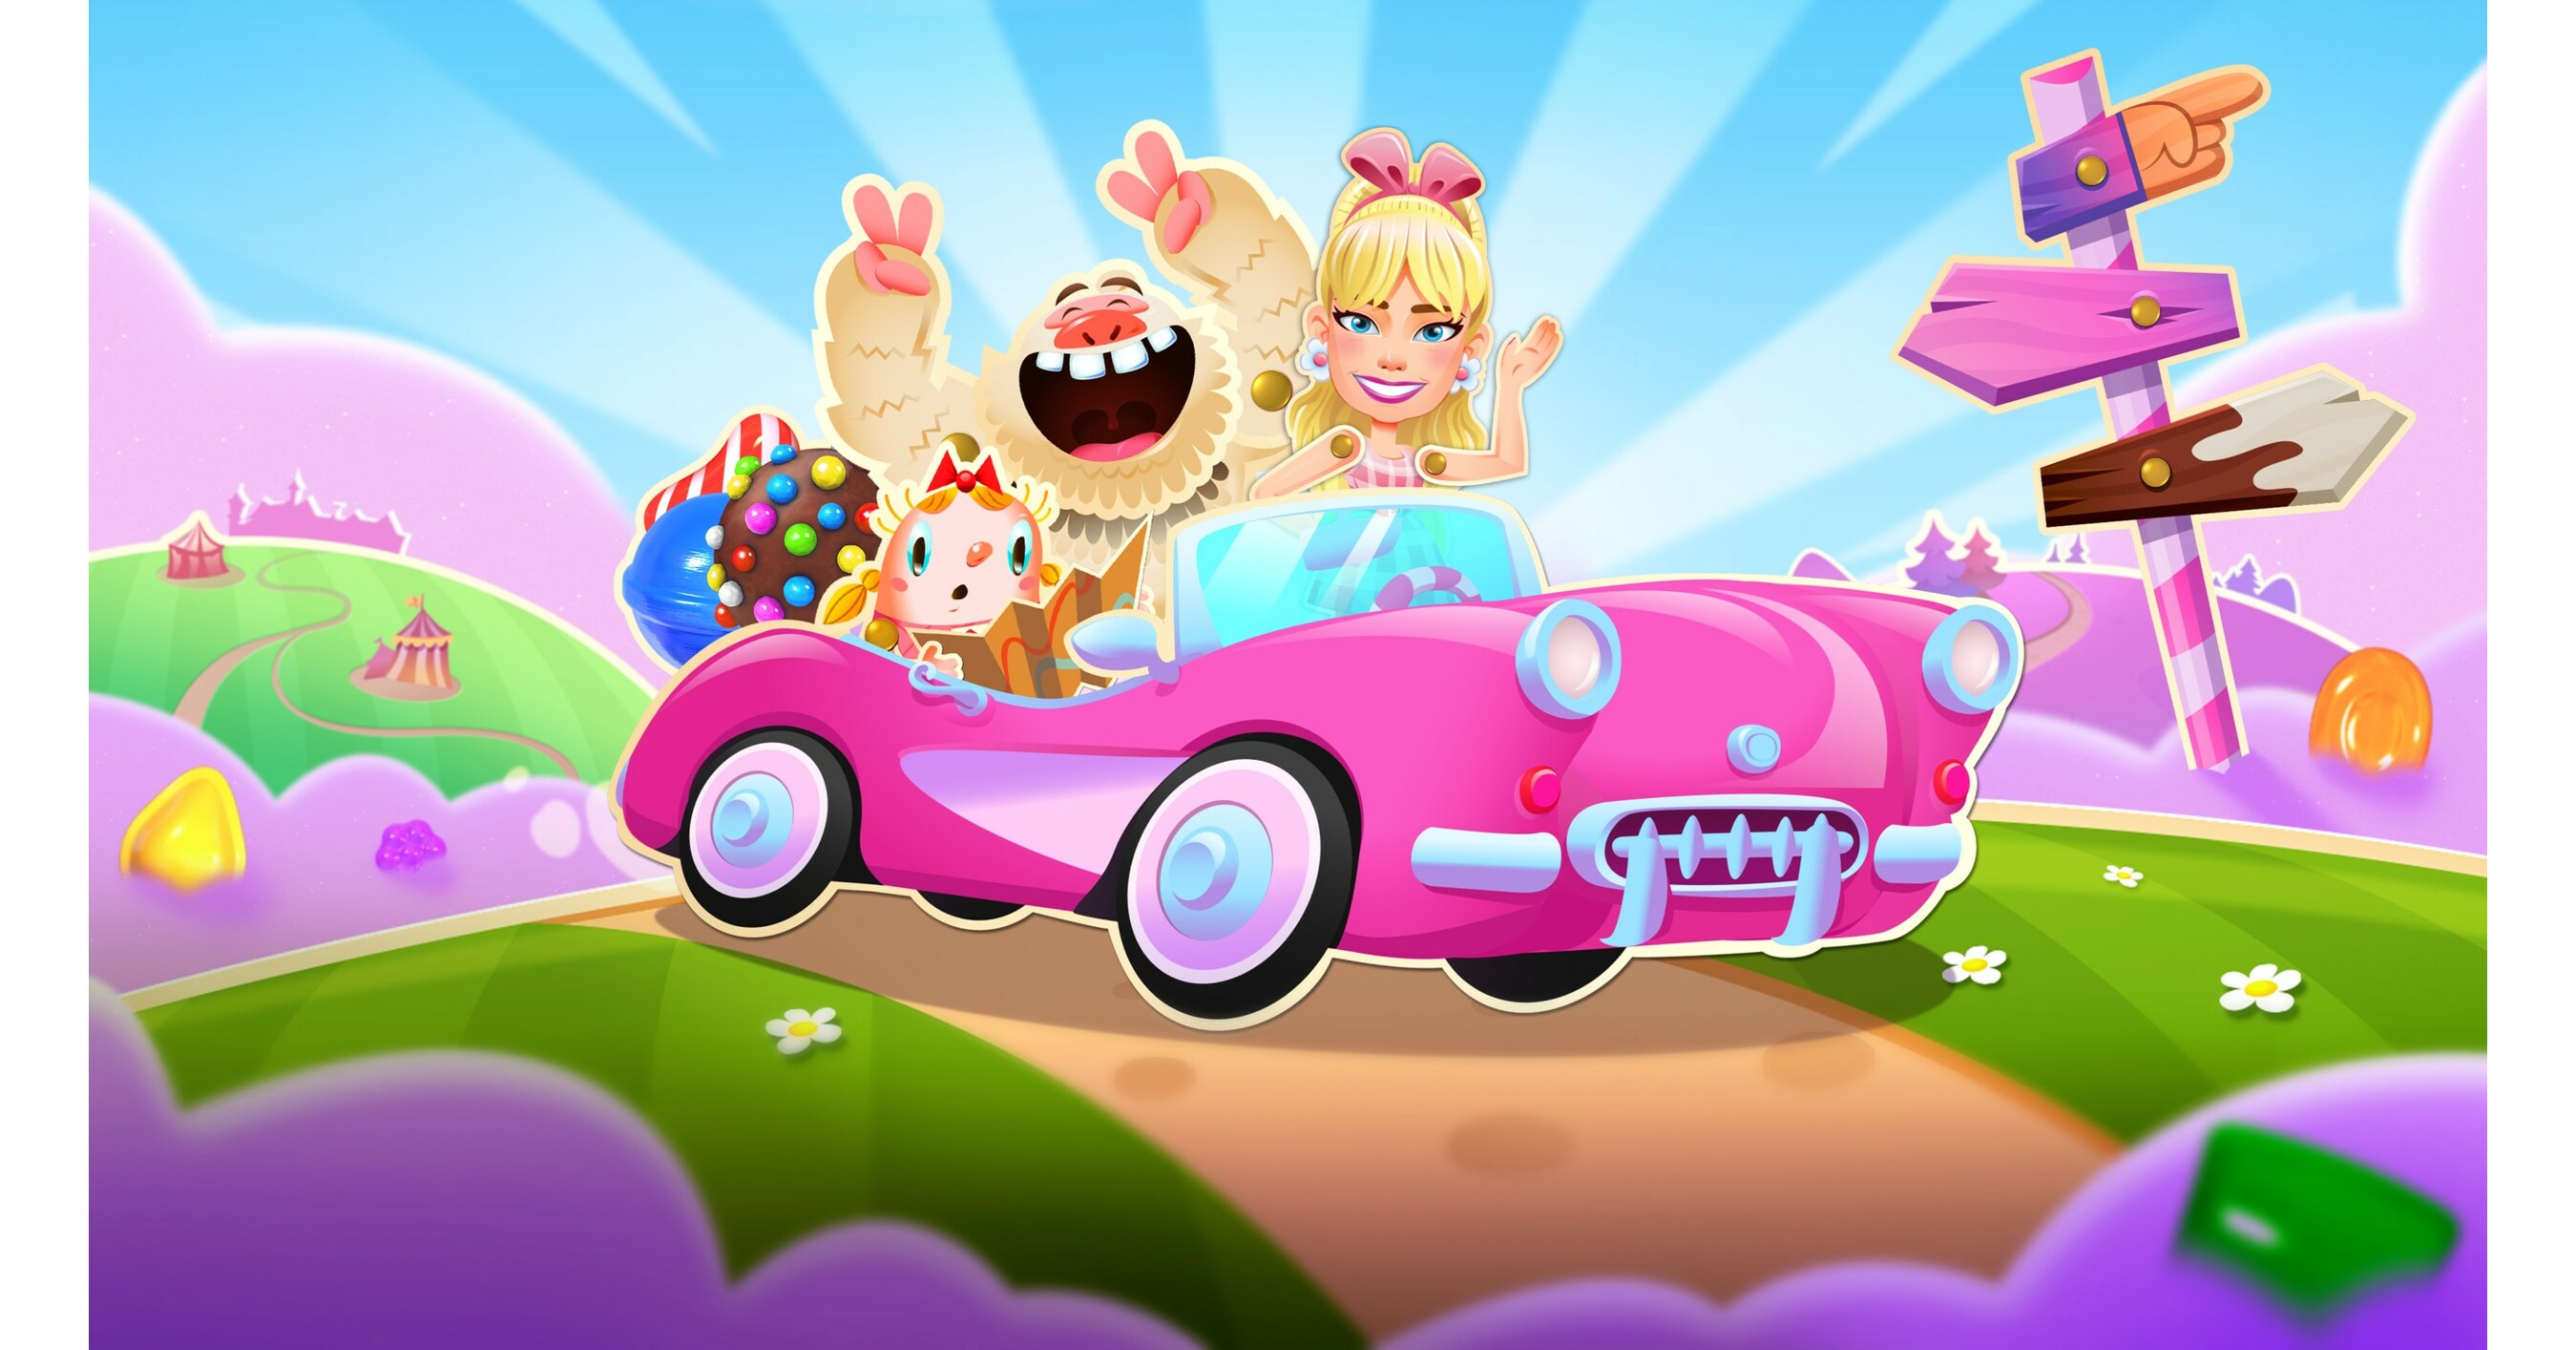 Hi BARBIE, Come On, Let's Go…Play Candy Crush®! BARBIE® and Candy Crush Saga  Team Up for the Ultimate Pink-tastic Partnership, Creating a One-of-a-Kind  Fantasy World for Players